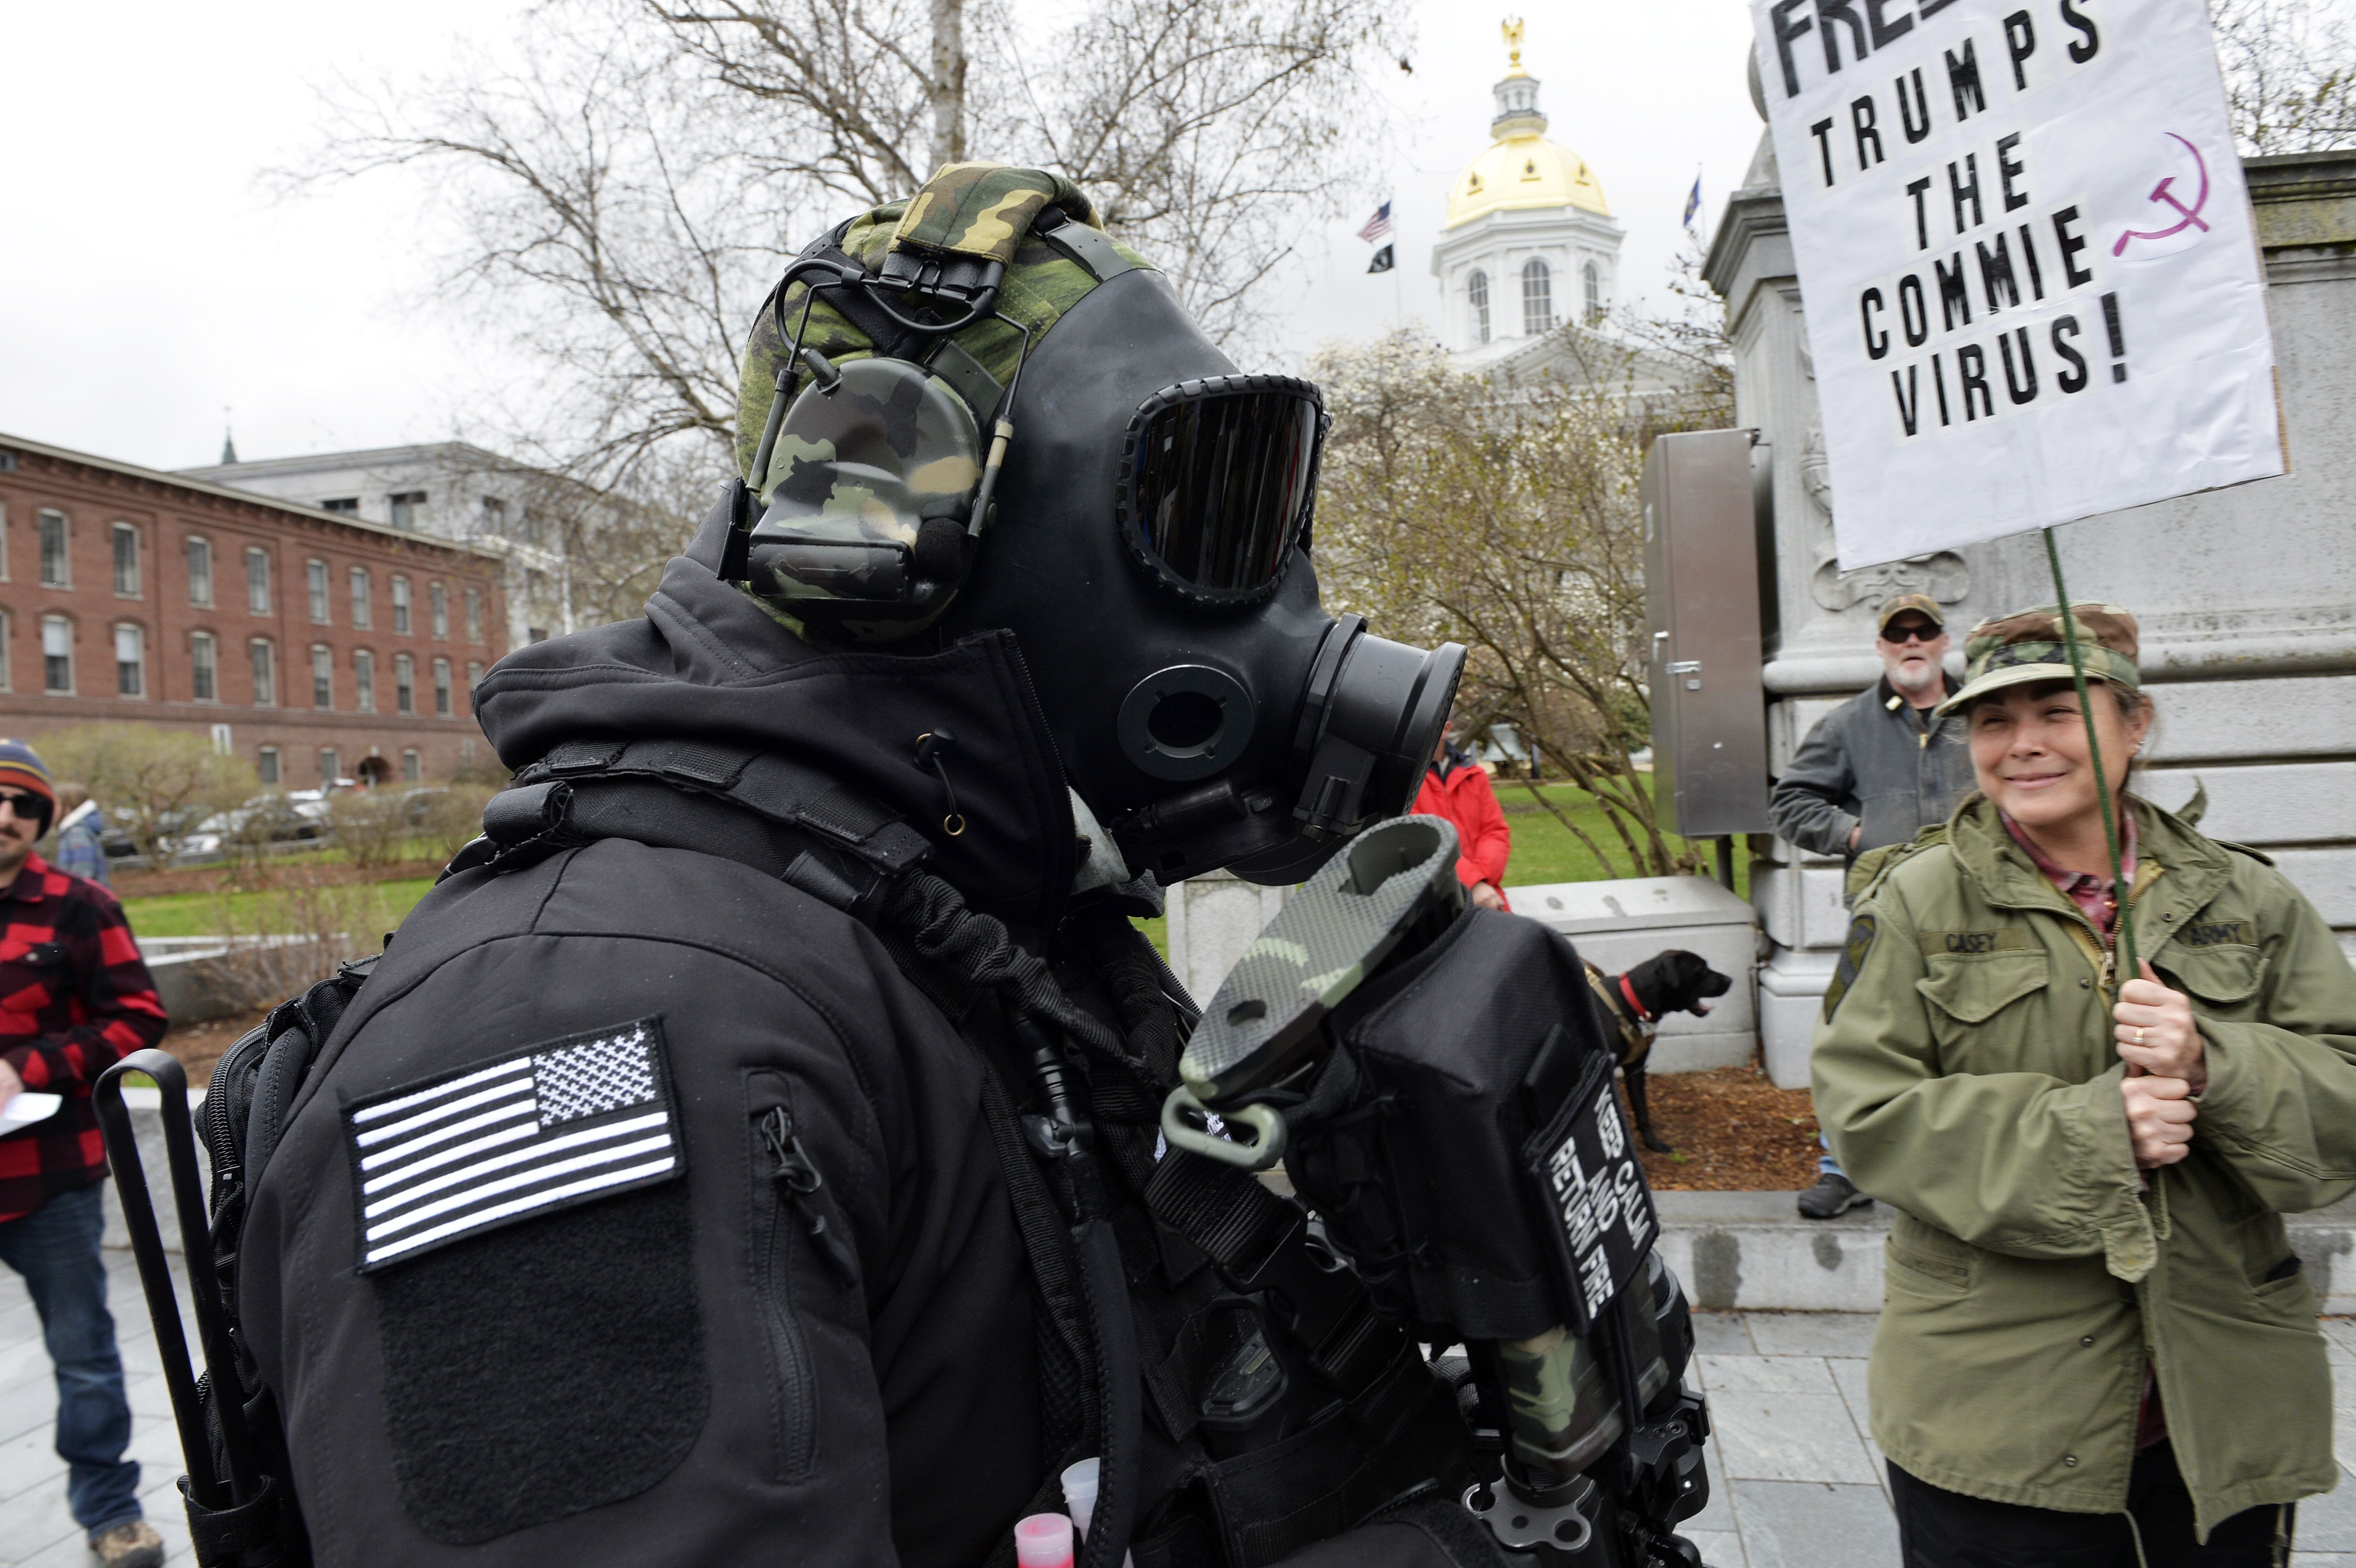 In this image, a masked and armed man walks past a sign that reads "Fear trumps the commie virus"